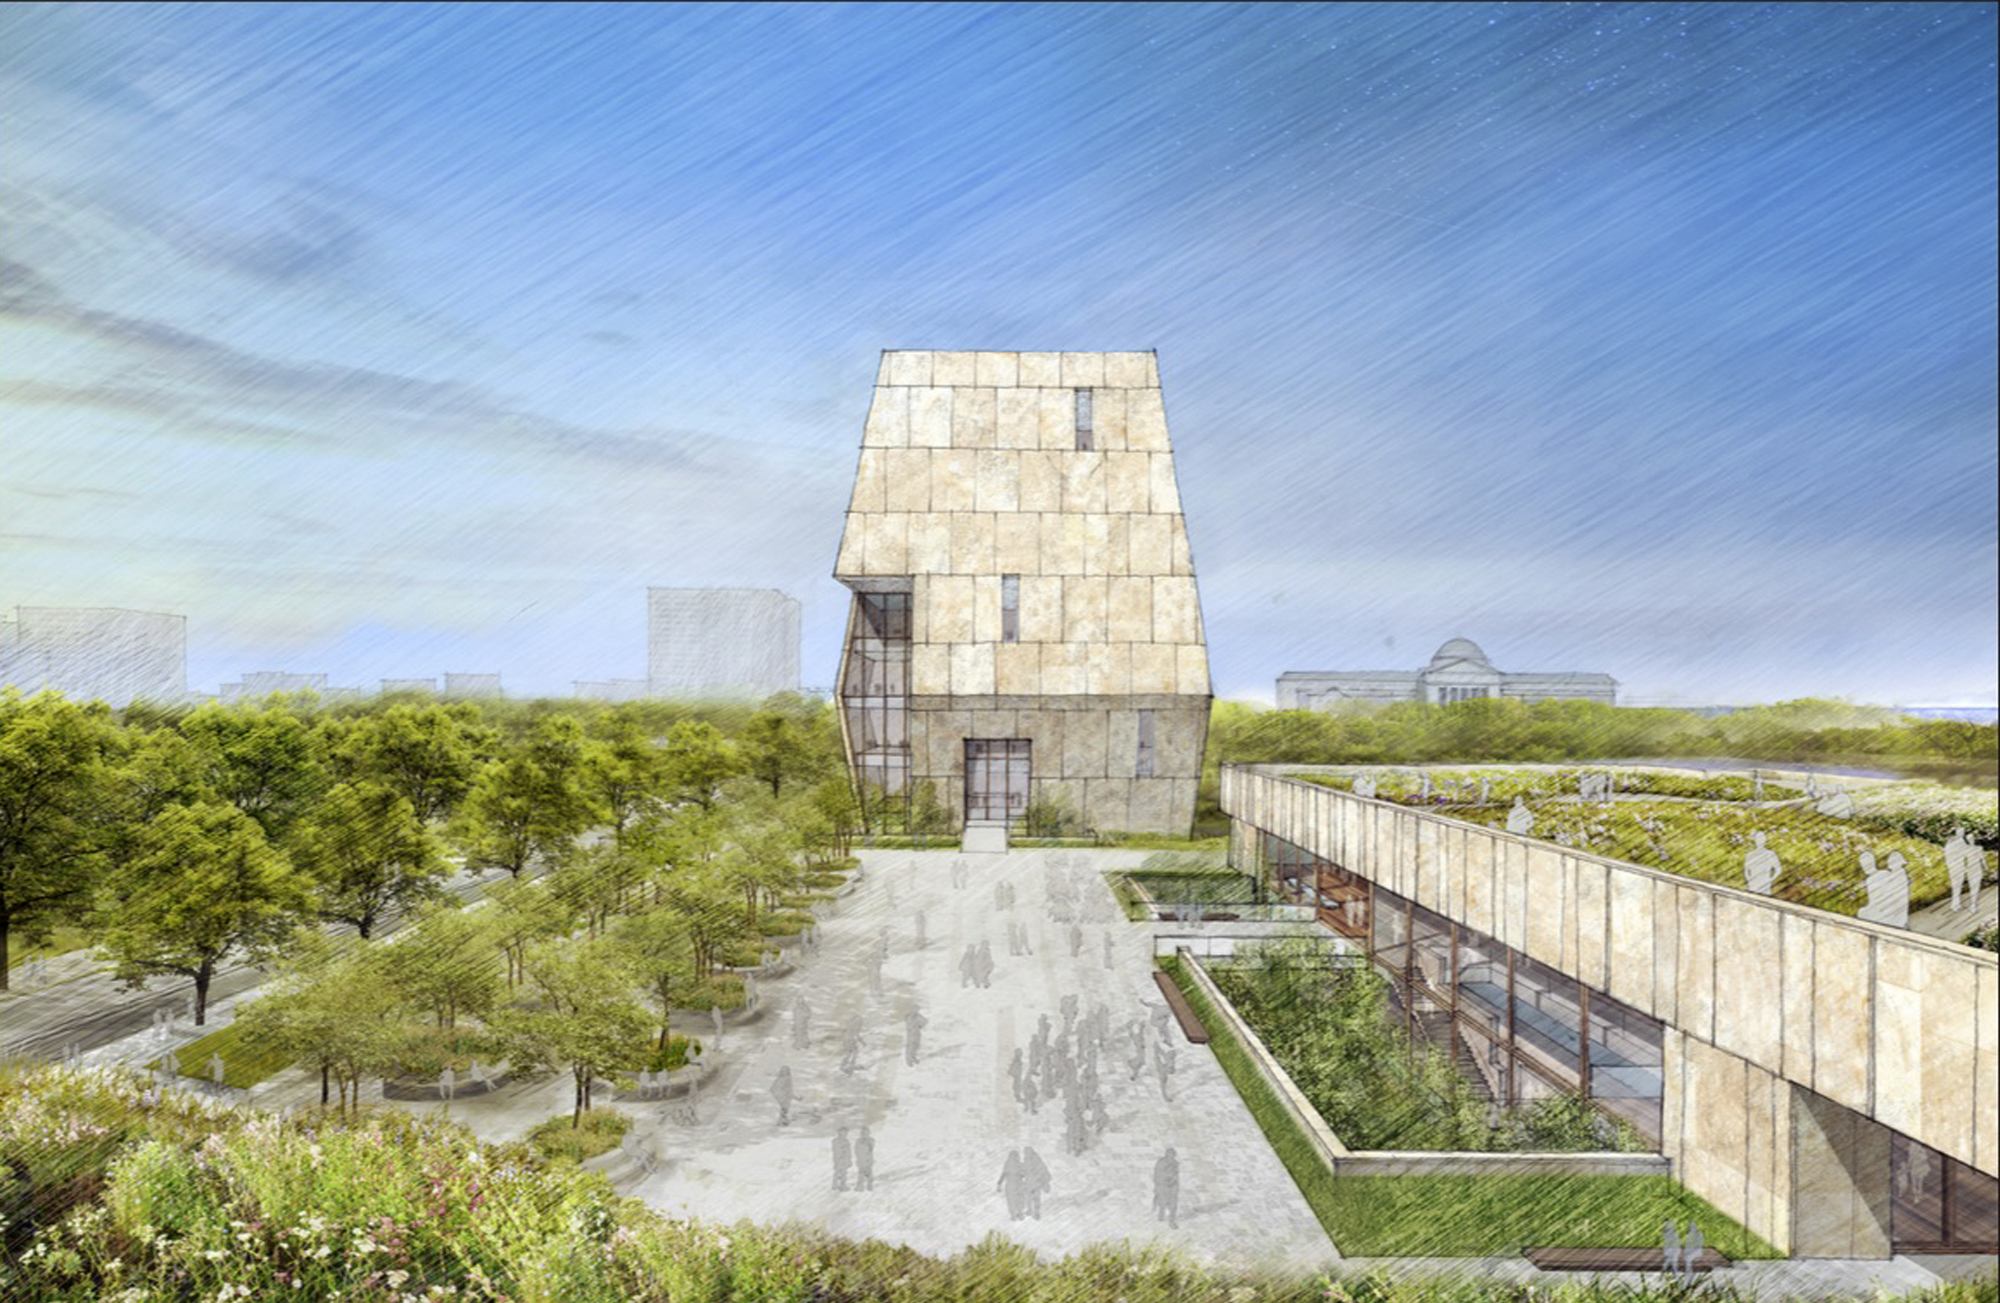 PHOTO: This illustration released on May 3, 2017 by the Obama Foundation shows plans for the proposed Obama Presidential Center with a museum, rear, in Jackson Park on Chicago's South Side.